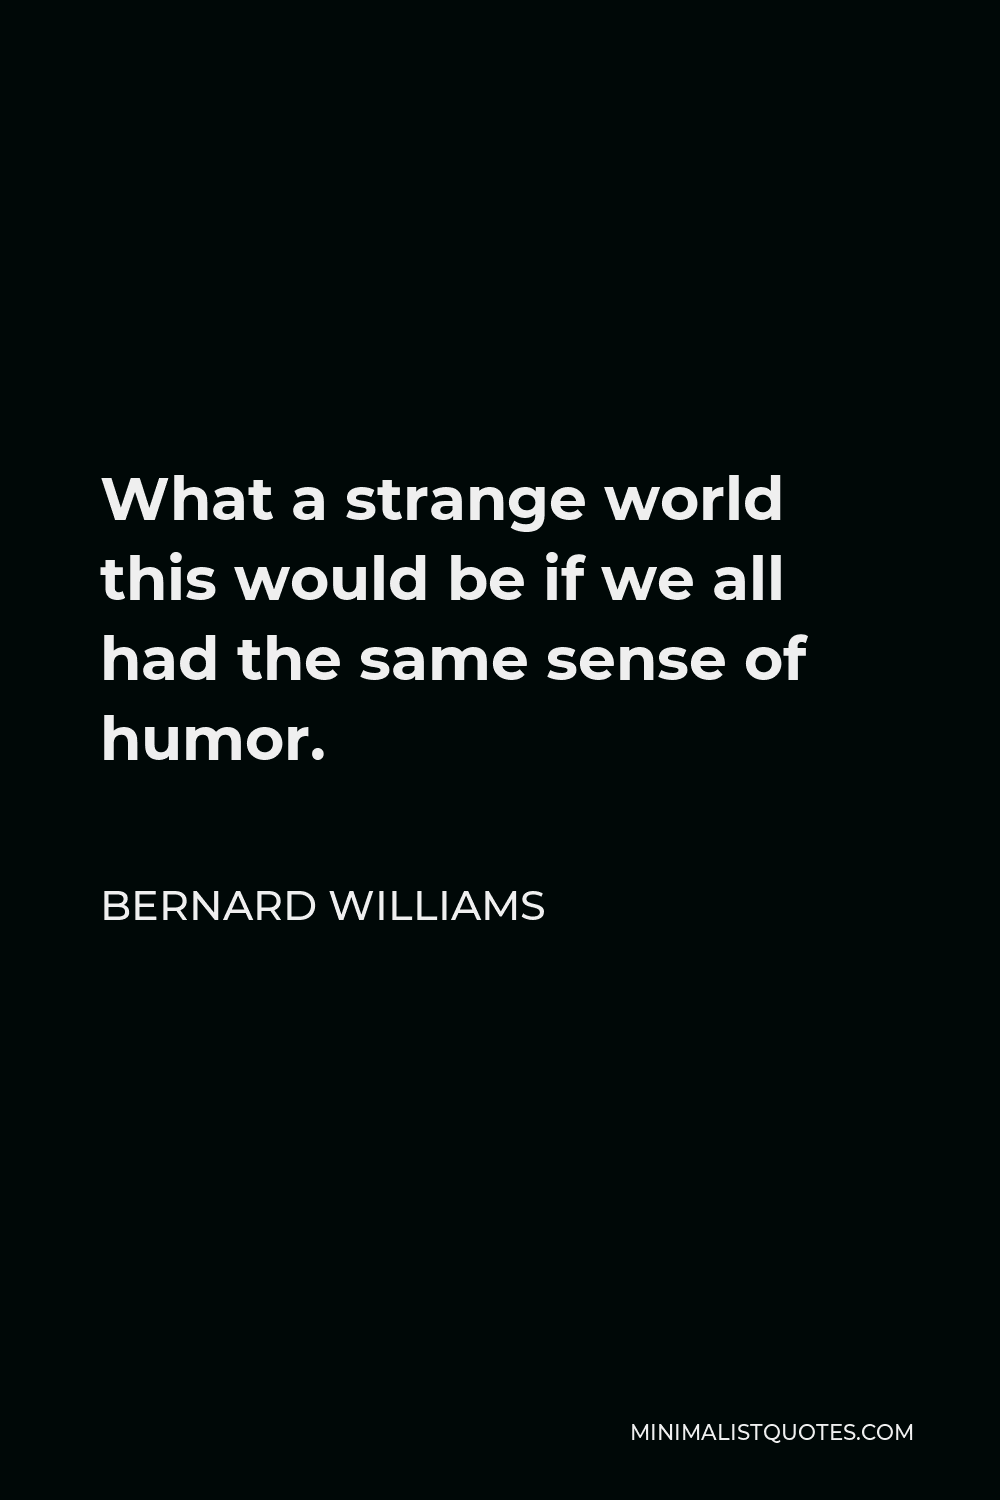 Bernard Williams Quote - What a strange world this would be if we all had the same sense of humor.